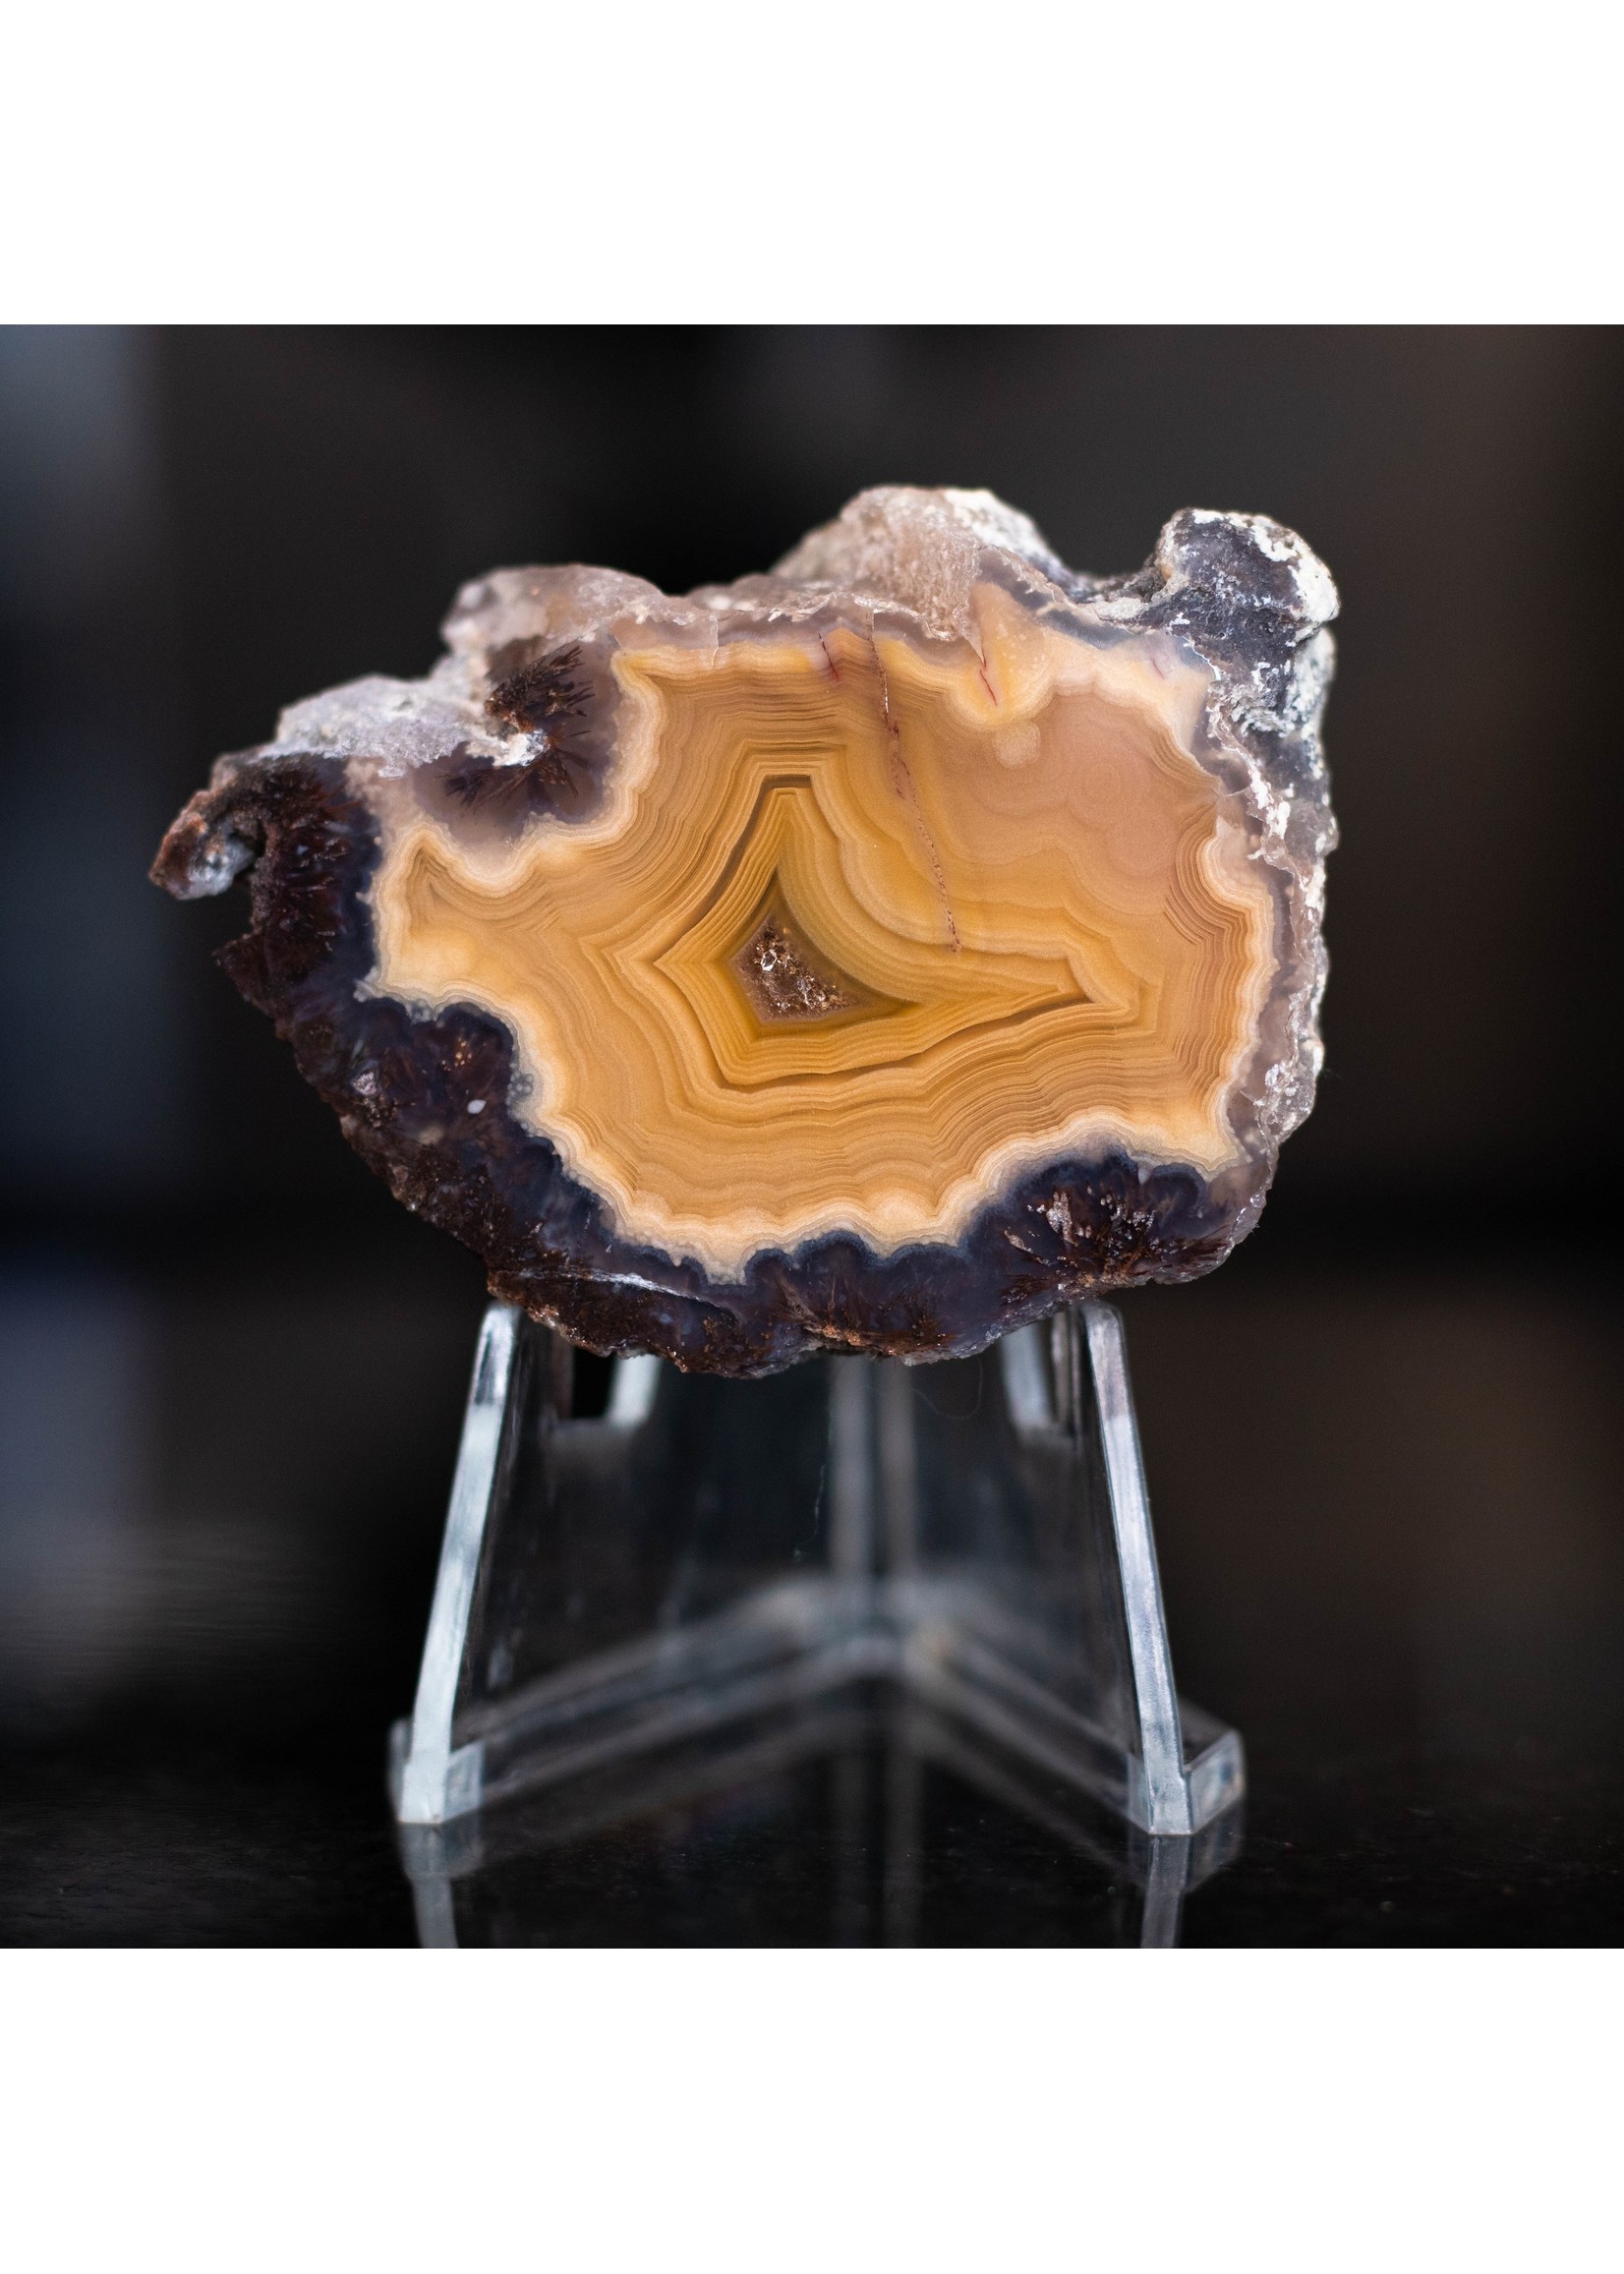 magnificent natural crazy lace agate, piece polished and rough, yellow mustard tones with druzy quartz